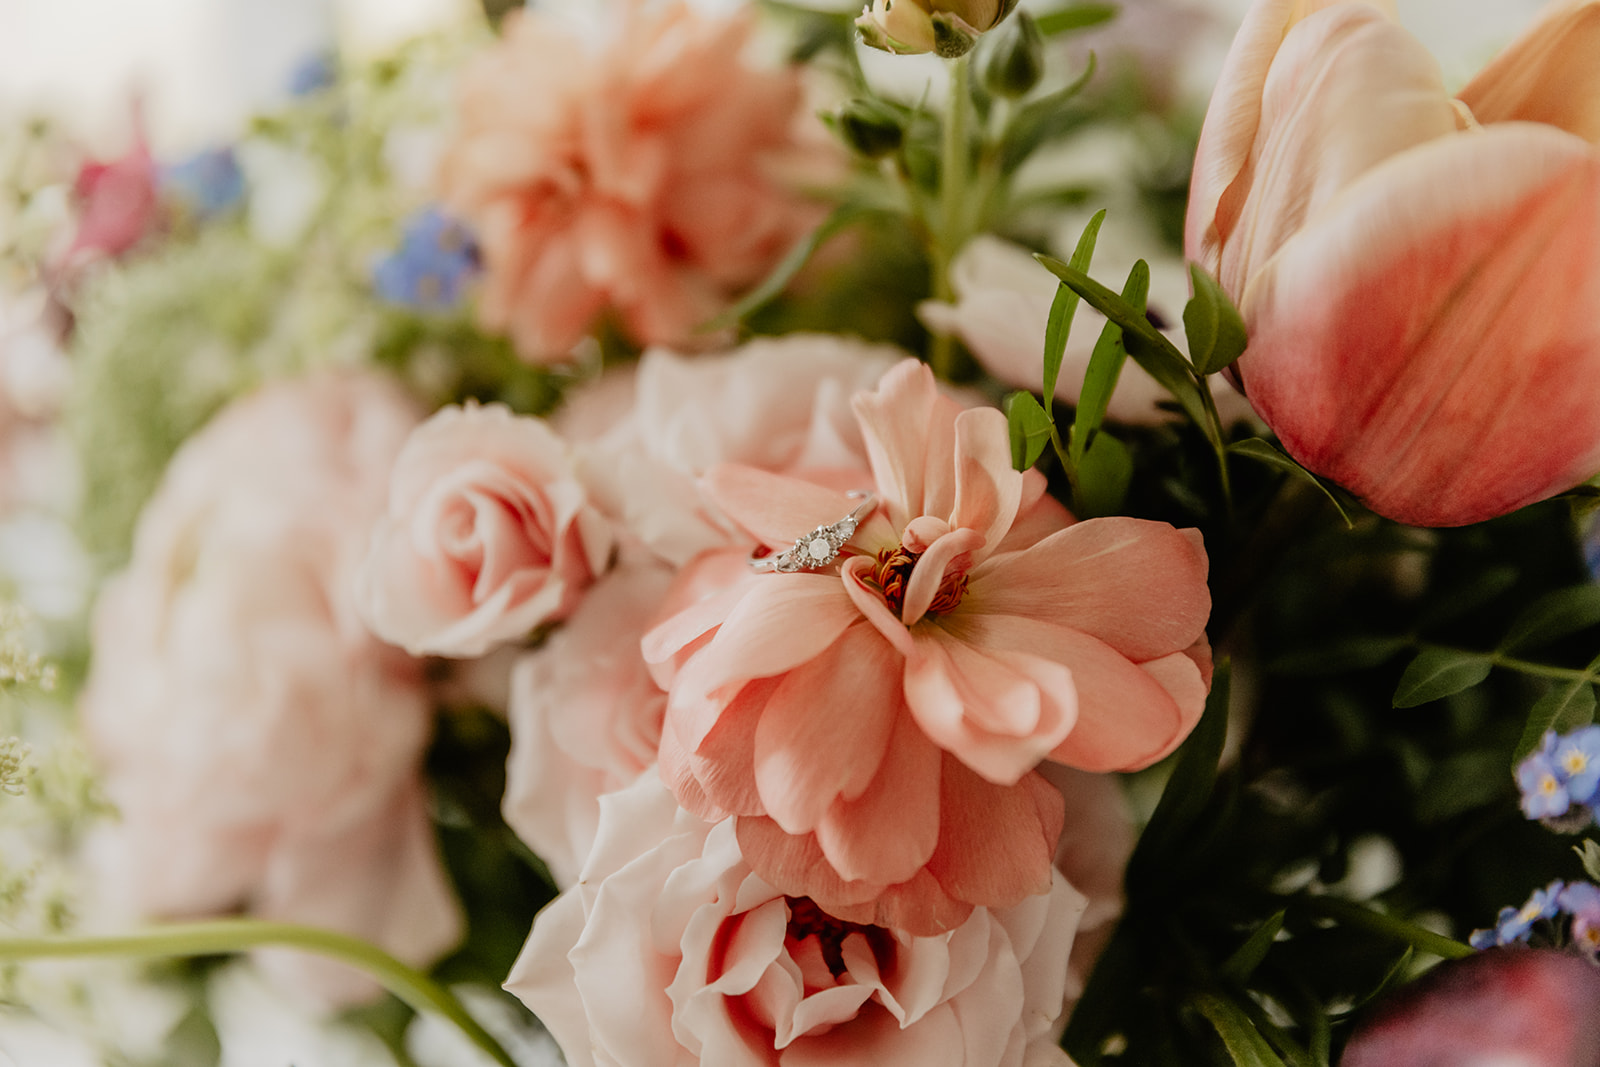 Bridal bouquet at a Secret Barn Wedding, West Sussex. By Olive Joy Photography